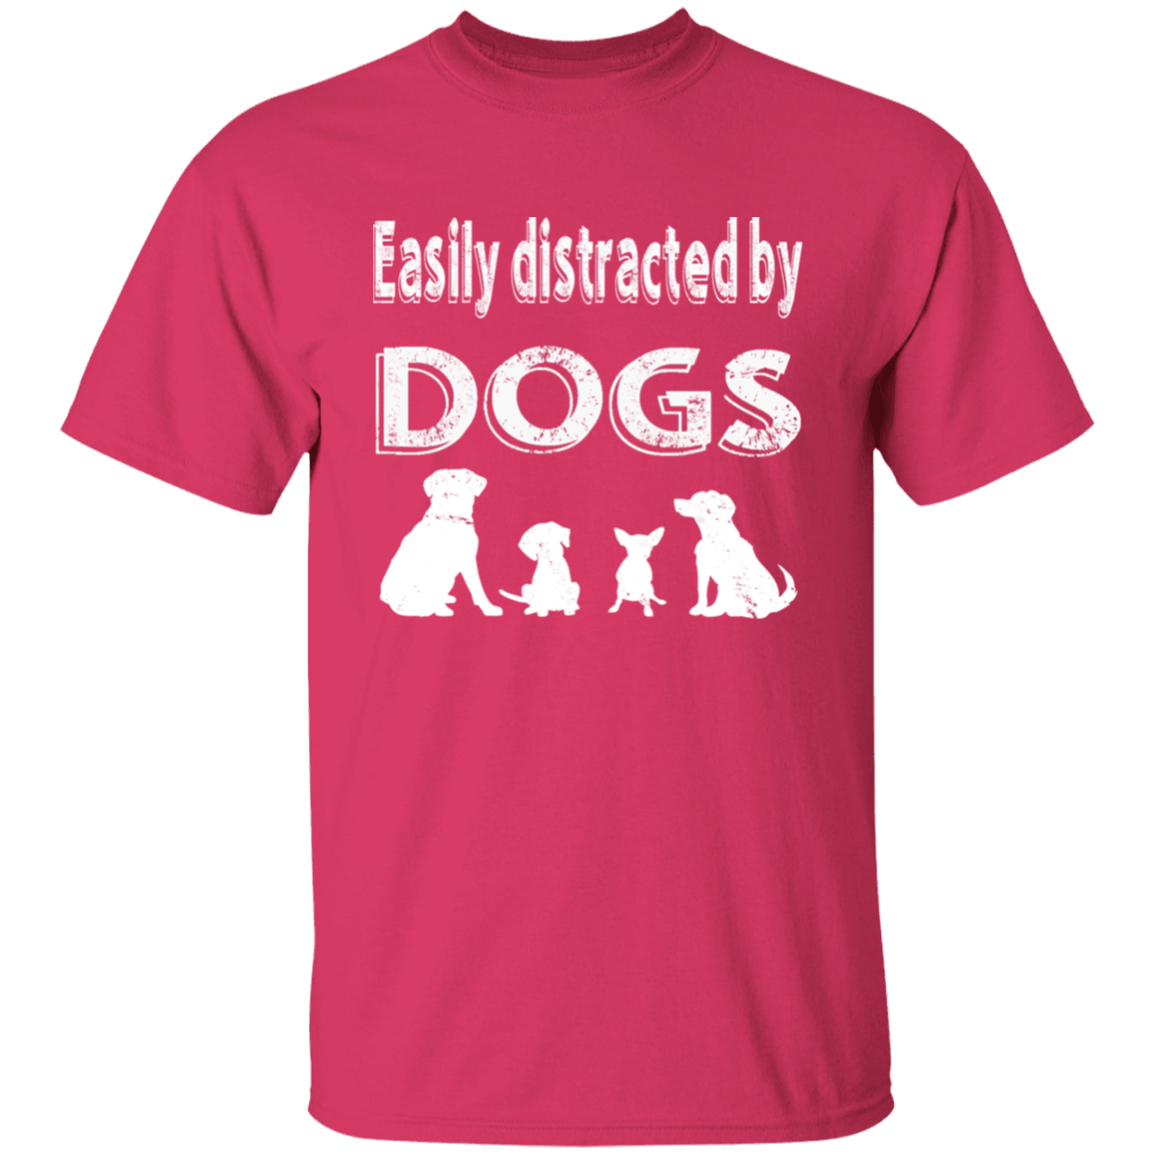 Easily Distracted By Dogs - T Shirt.